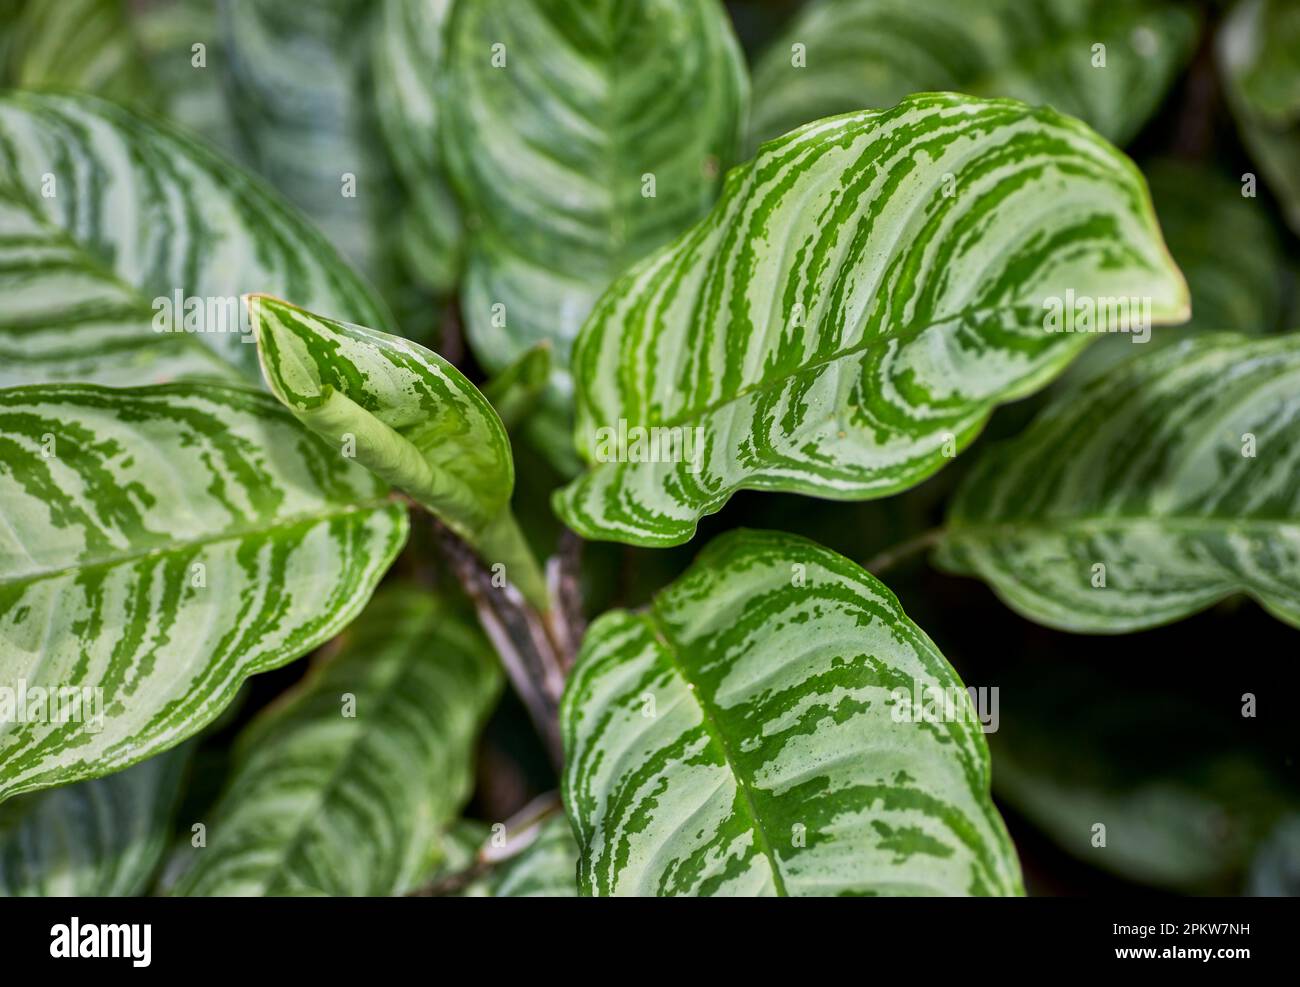 Large Aglaonema Commutatum Leaves in Rainforest also known as Chinese Evergreen or Poison Dart Plant Stock Photo